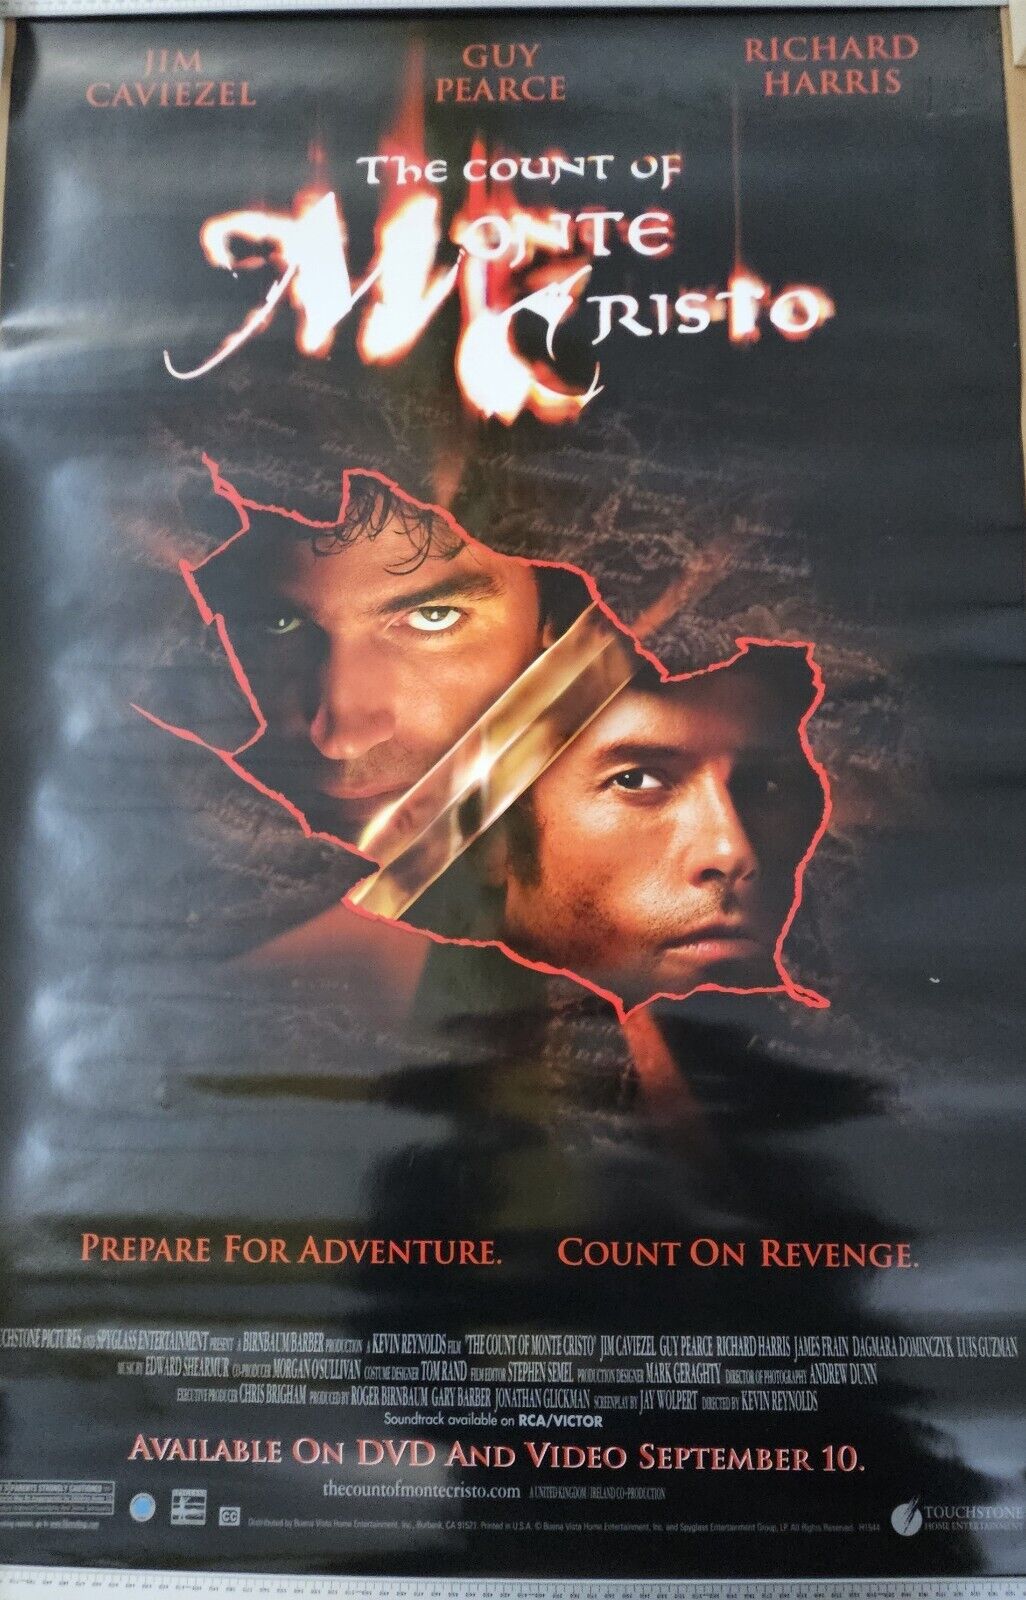 The Count Of Monte Cristo  26 x 39.75   DVD promotional Movie poster